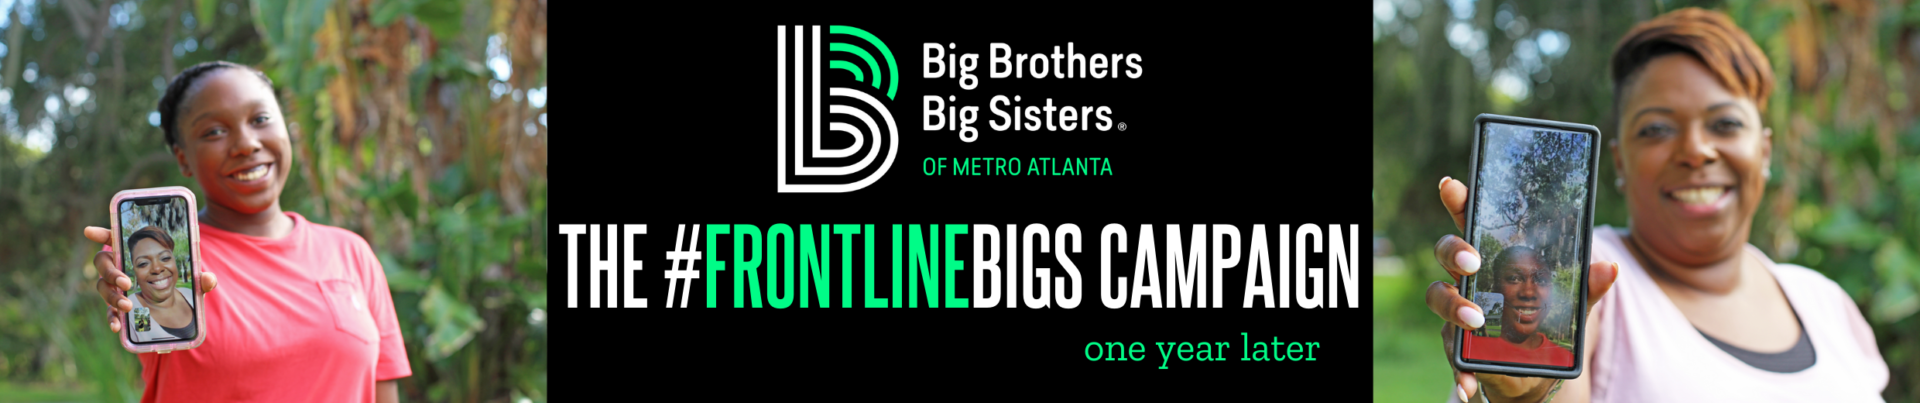 The #FrontlineBigs Campaign